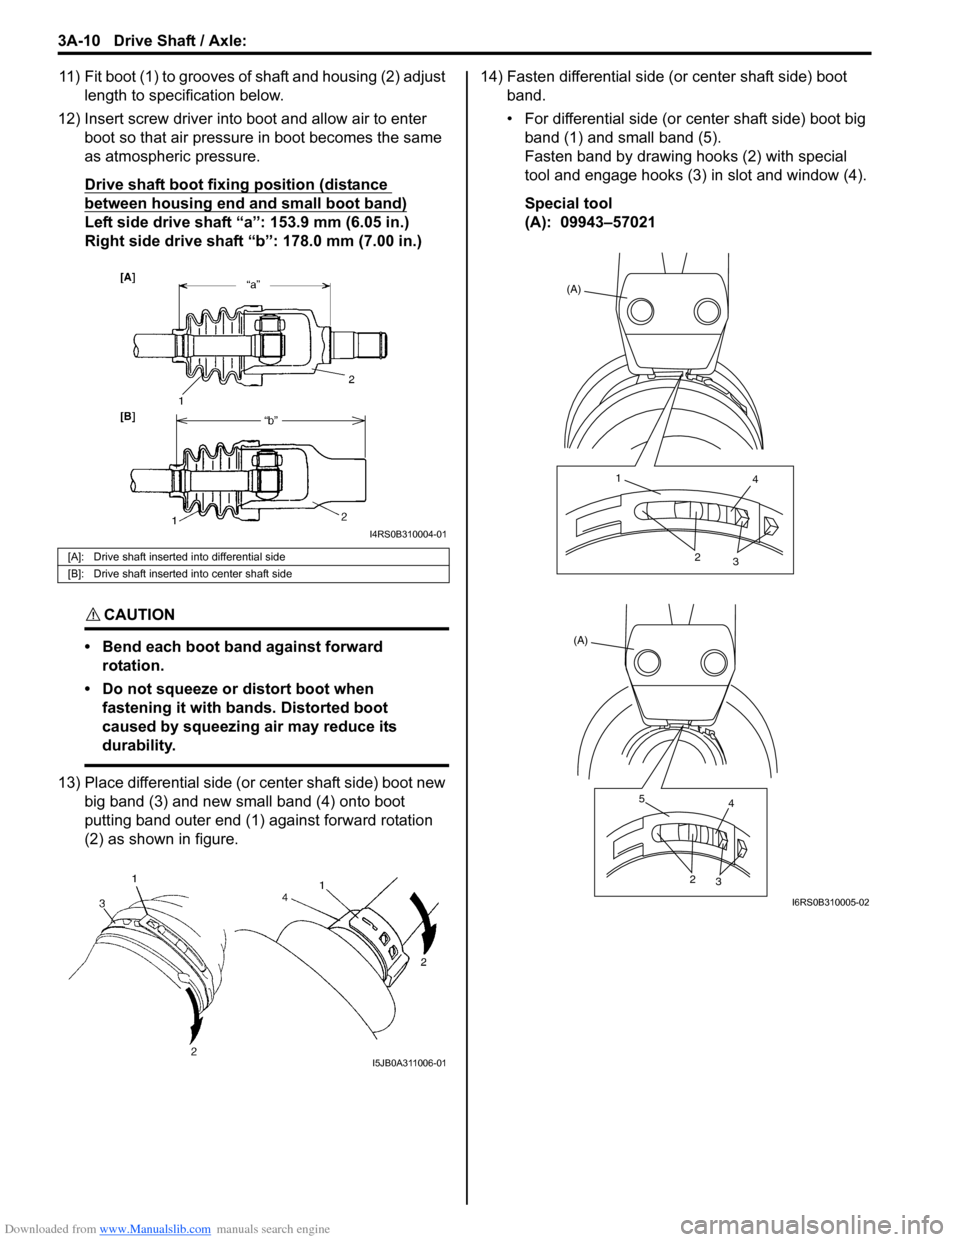 SUZUKI SWIFT 2005 2.G Service Workshop Manual Downloaded from www.Manualslib.com manuals search engine 3A-10 Drive Shaft / Axle: 
11) Fit boot (1) to grooves of shaft and housing (2) adjust 
length to specification below.
12) Insert screw driver 